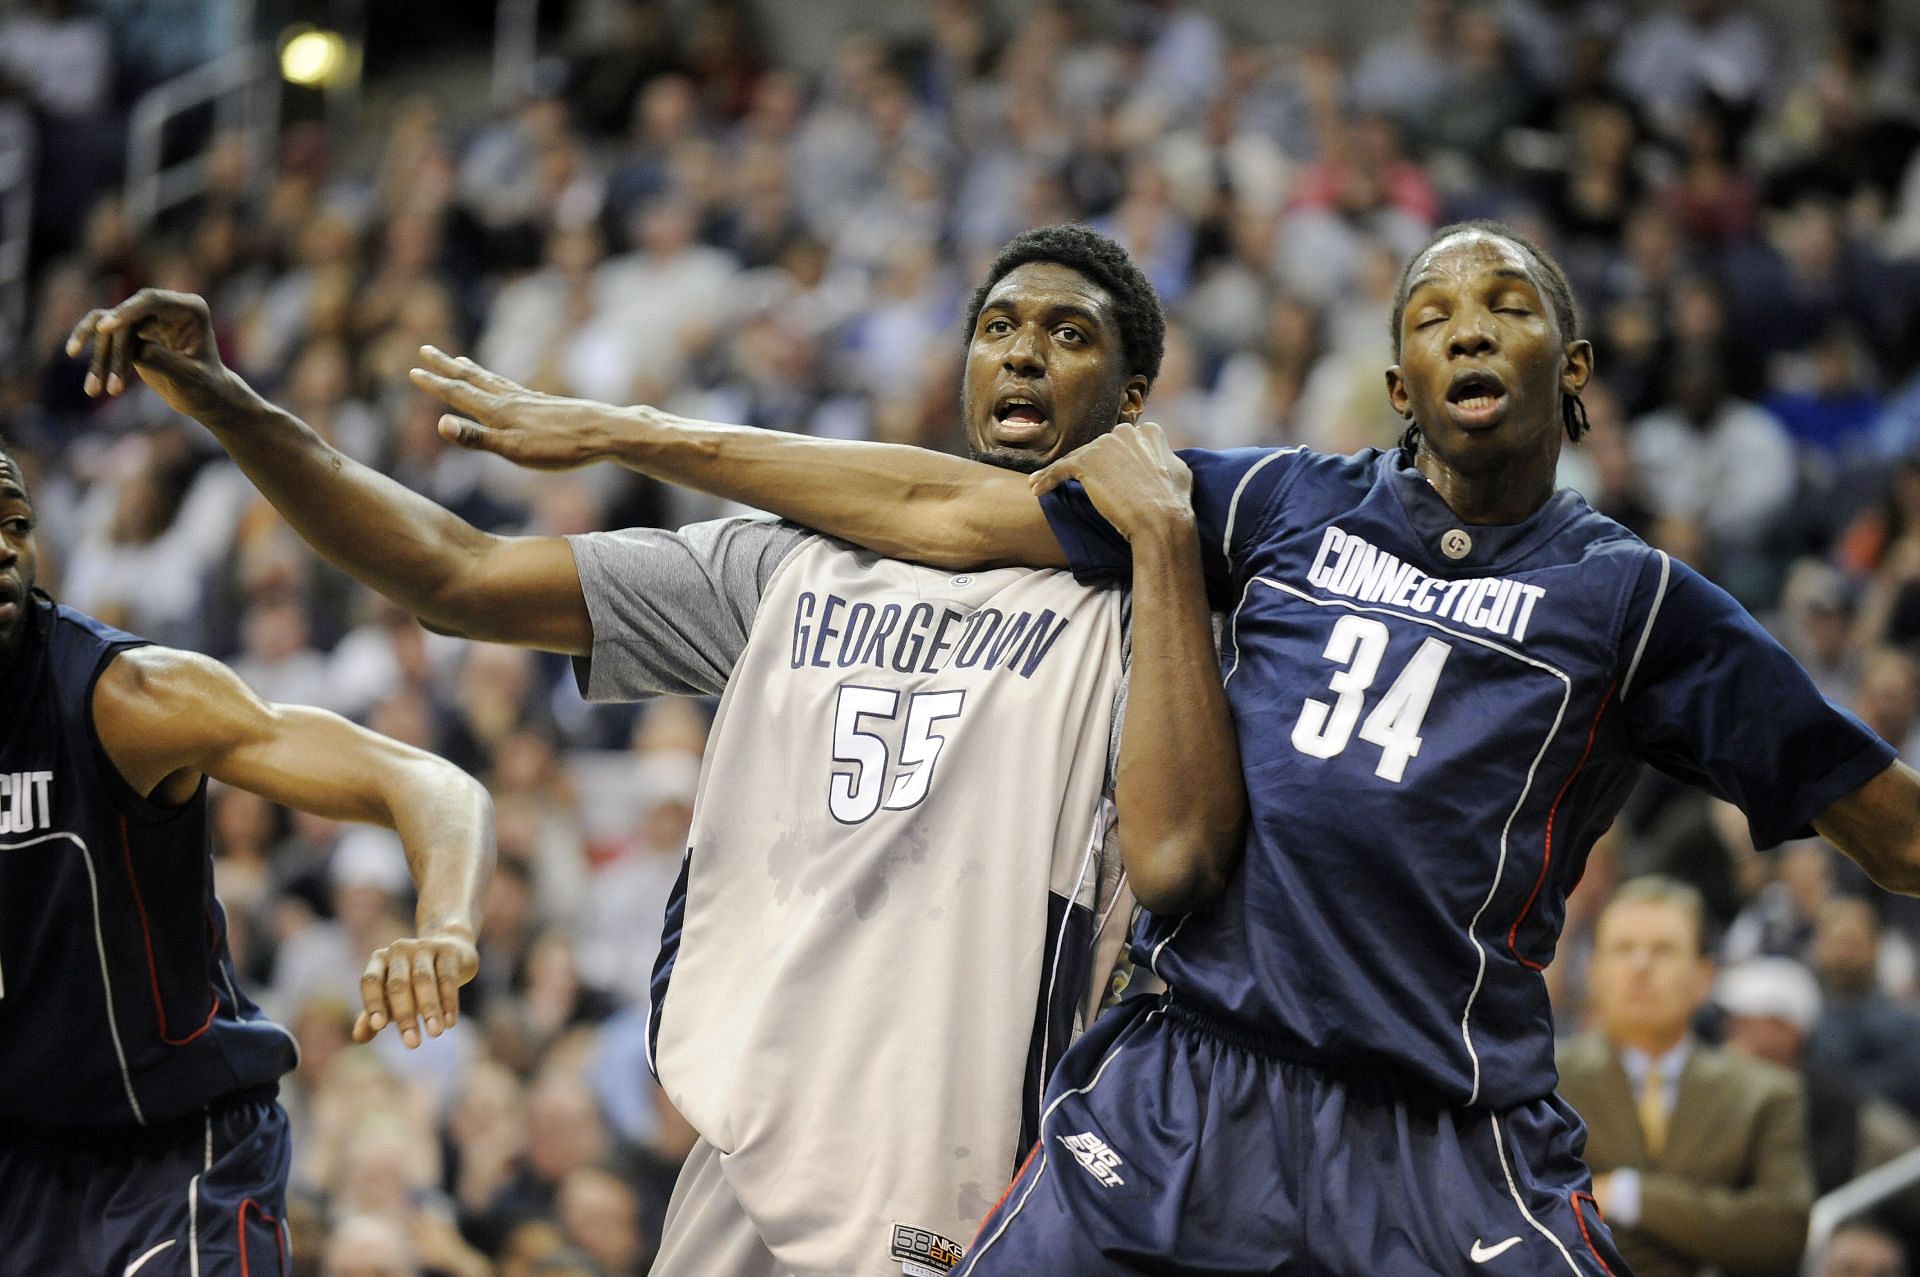 Massive center Hasheem Thabeet used his defensive skills to become one of the best players in UConn history.